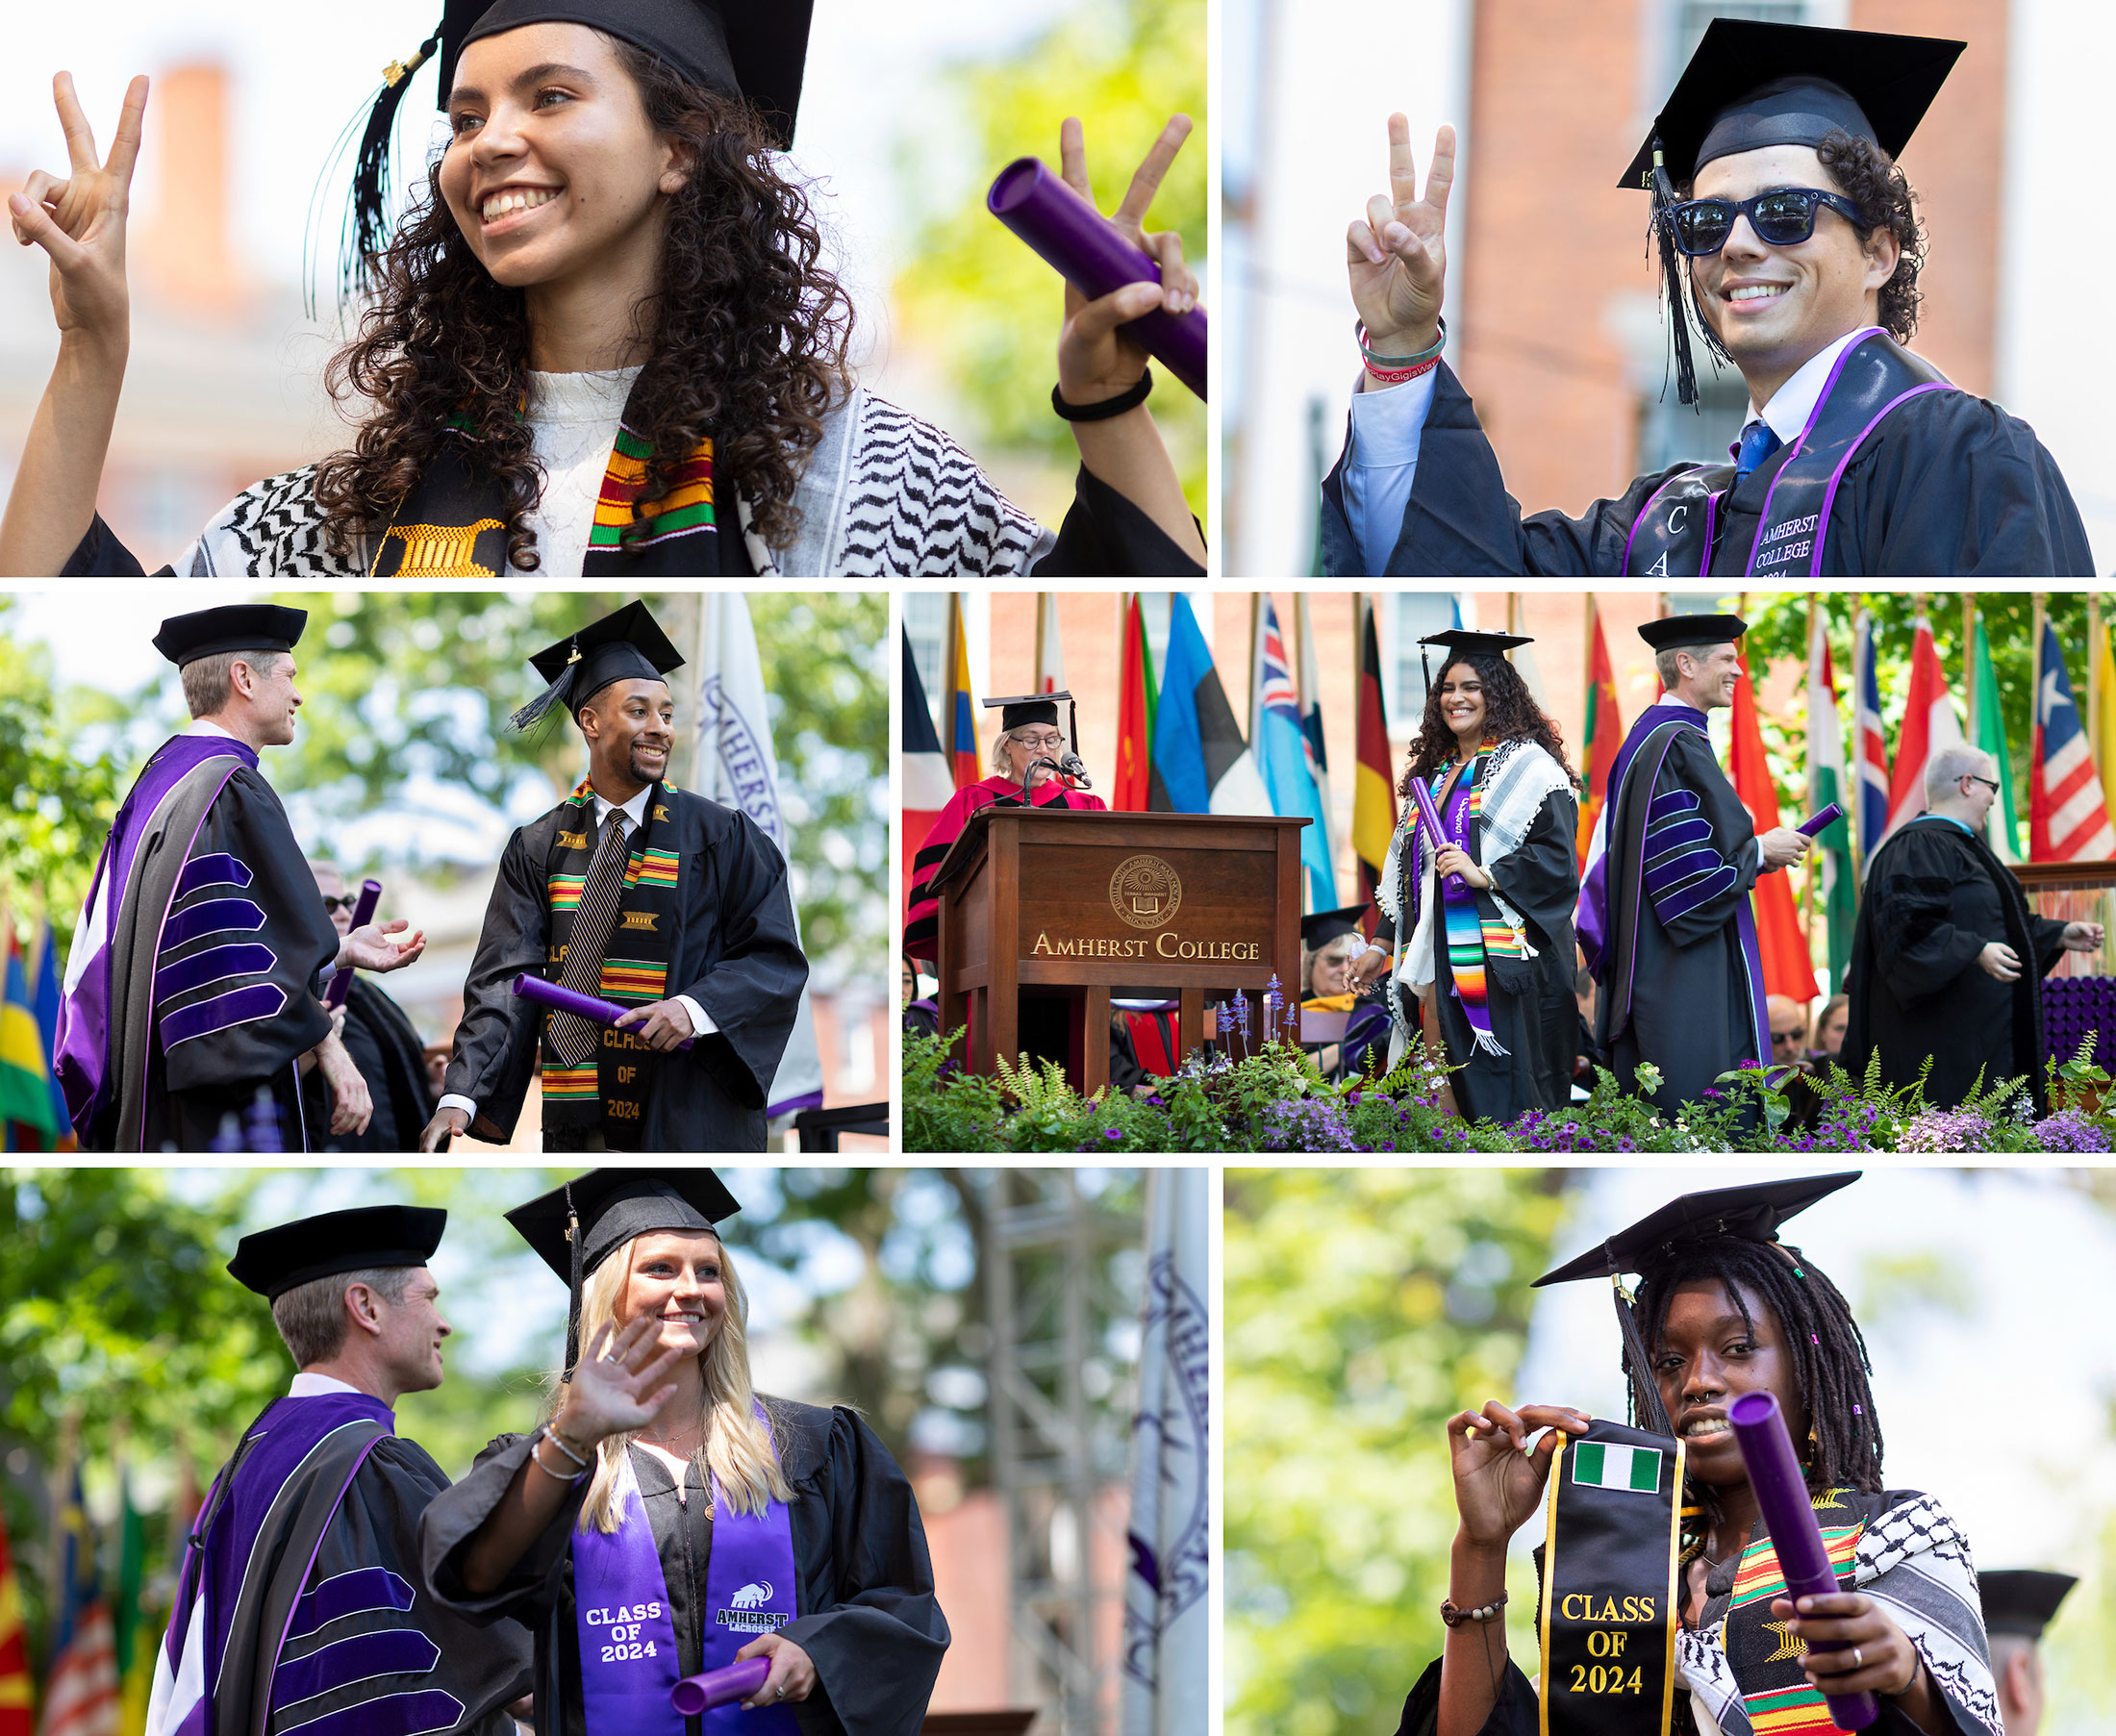 A collage of imags shoring students crossing the stage to receive their diplomas.